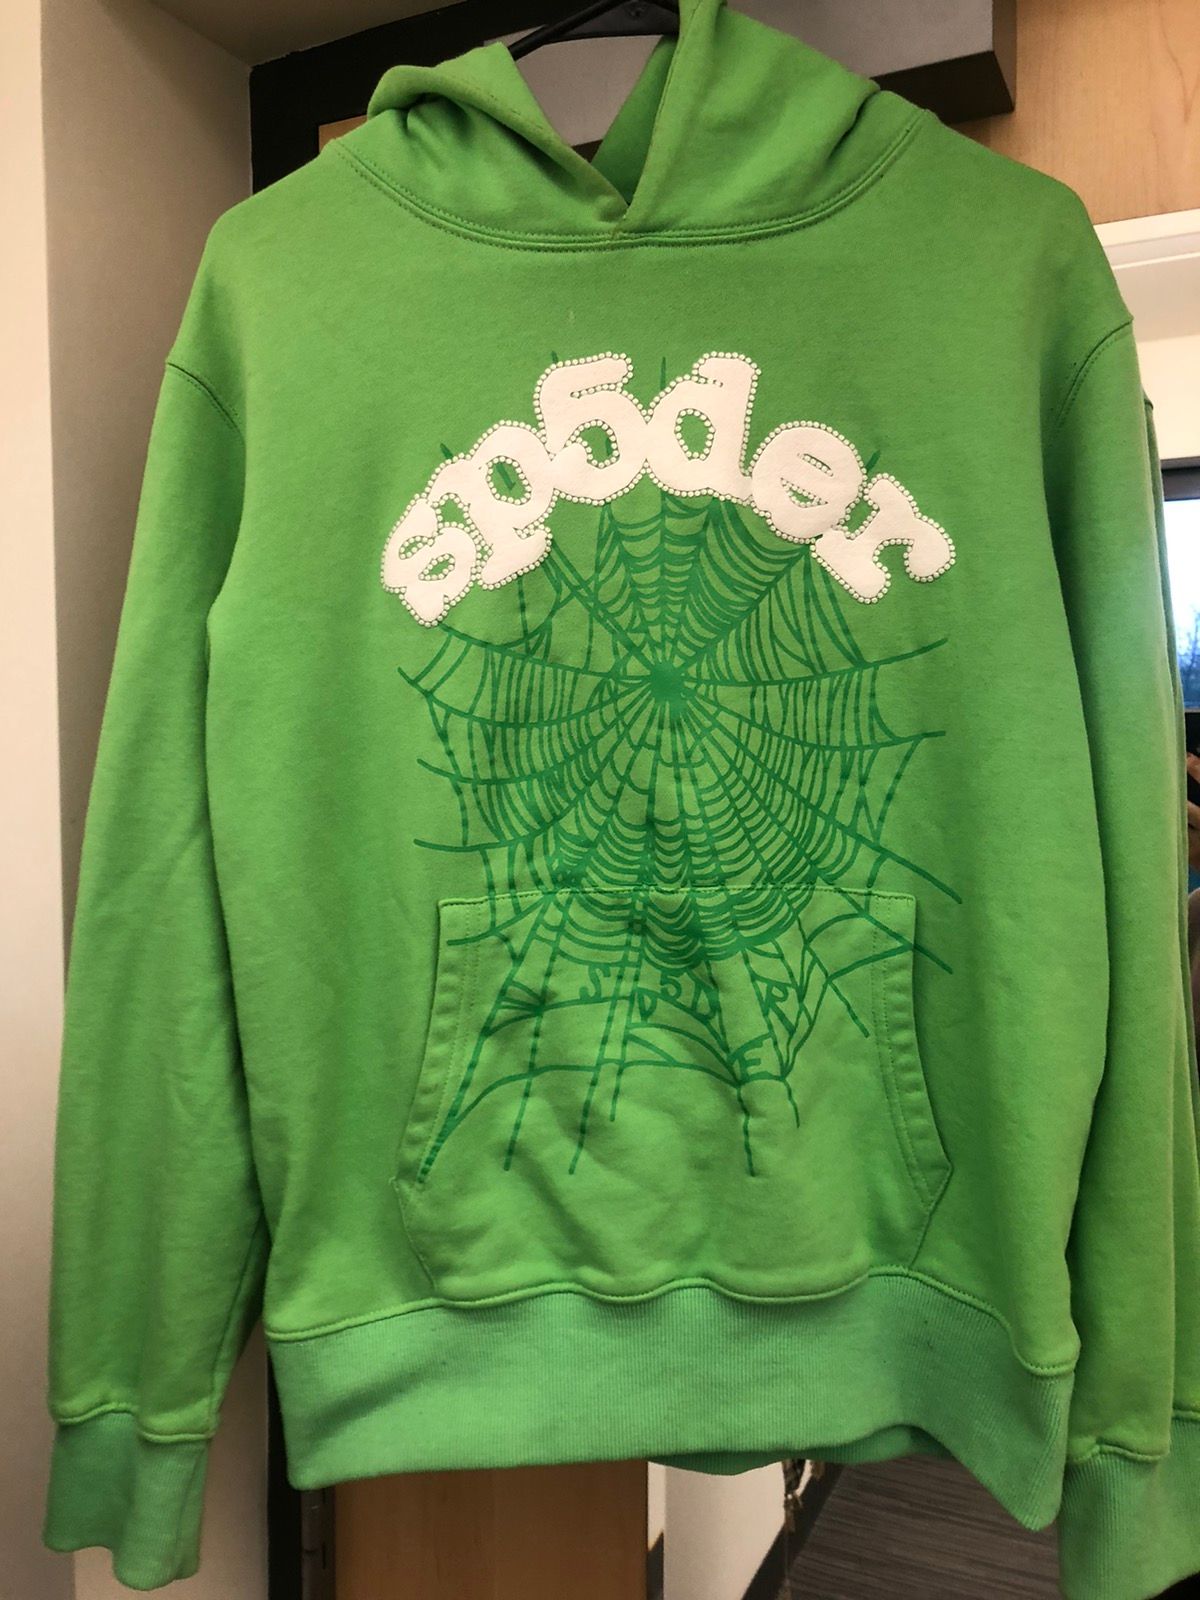 Spider Worldwide Spider “sp5der” hoodie, lime green, size small Size US S / EU 44-46 / 1 - 1 Preview